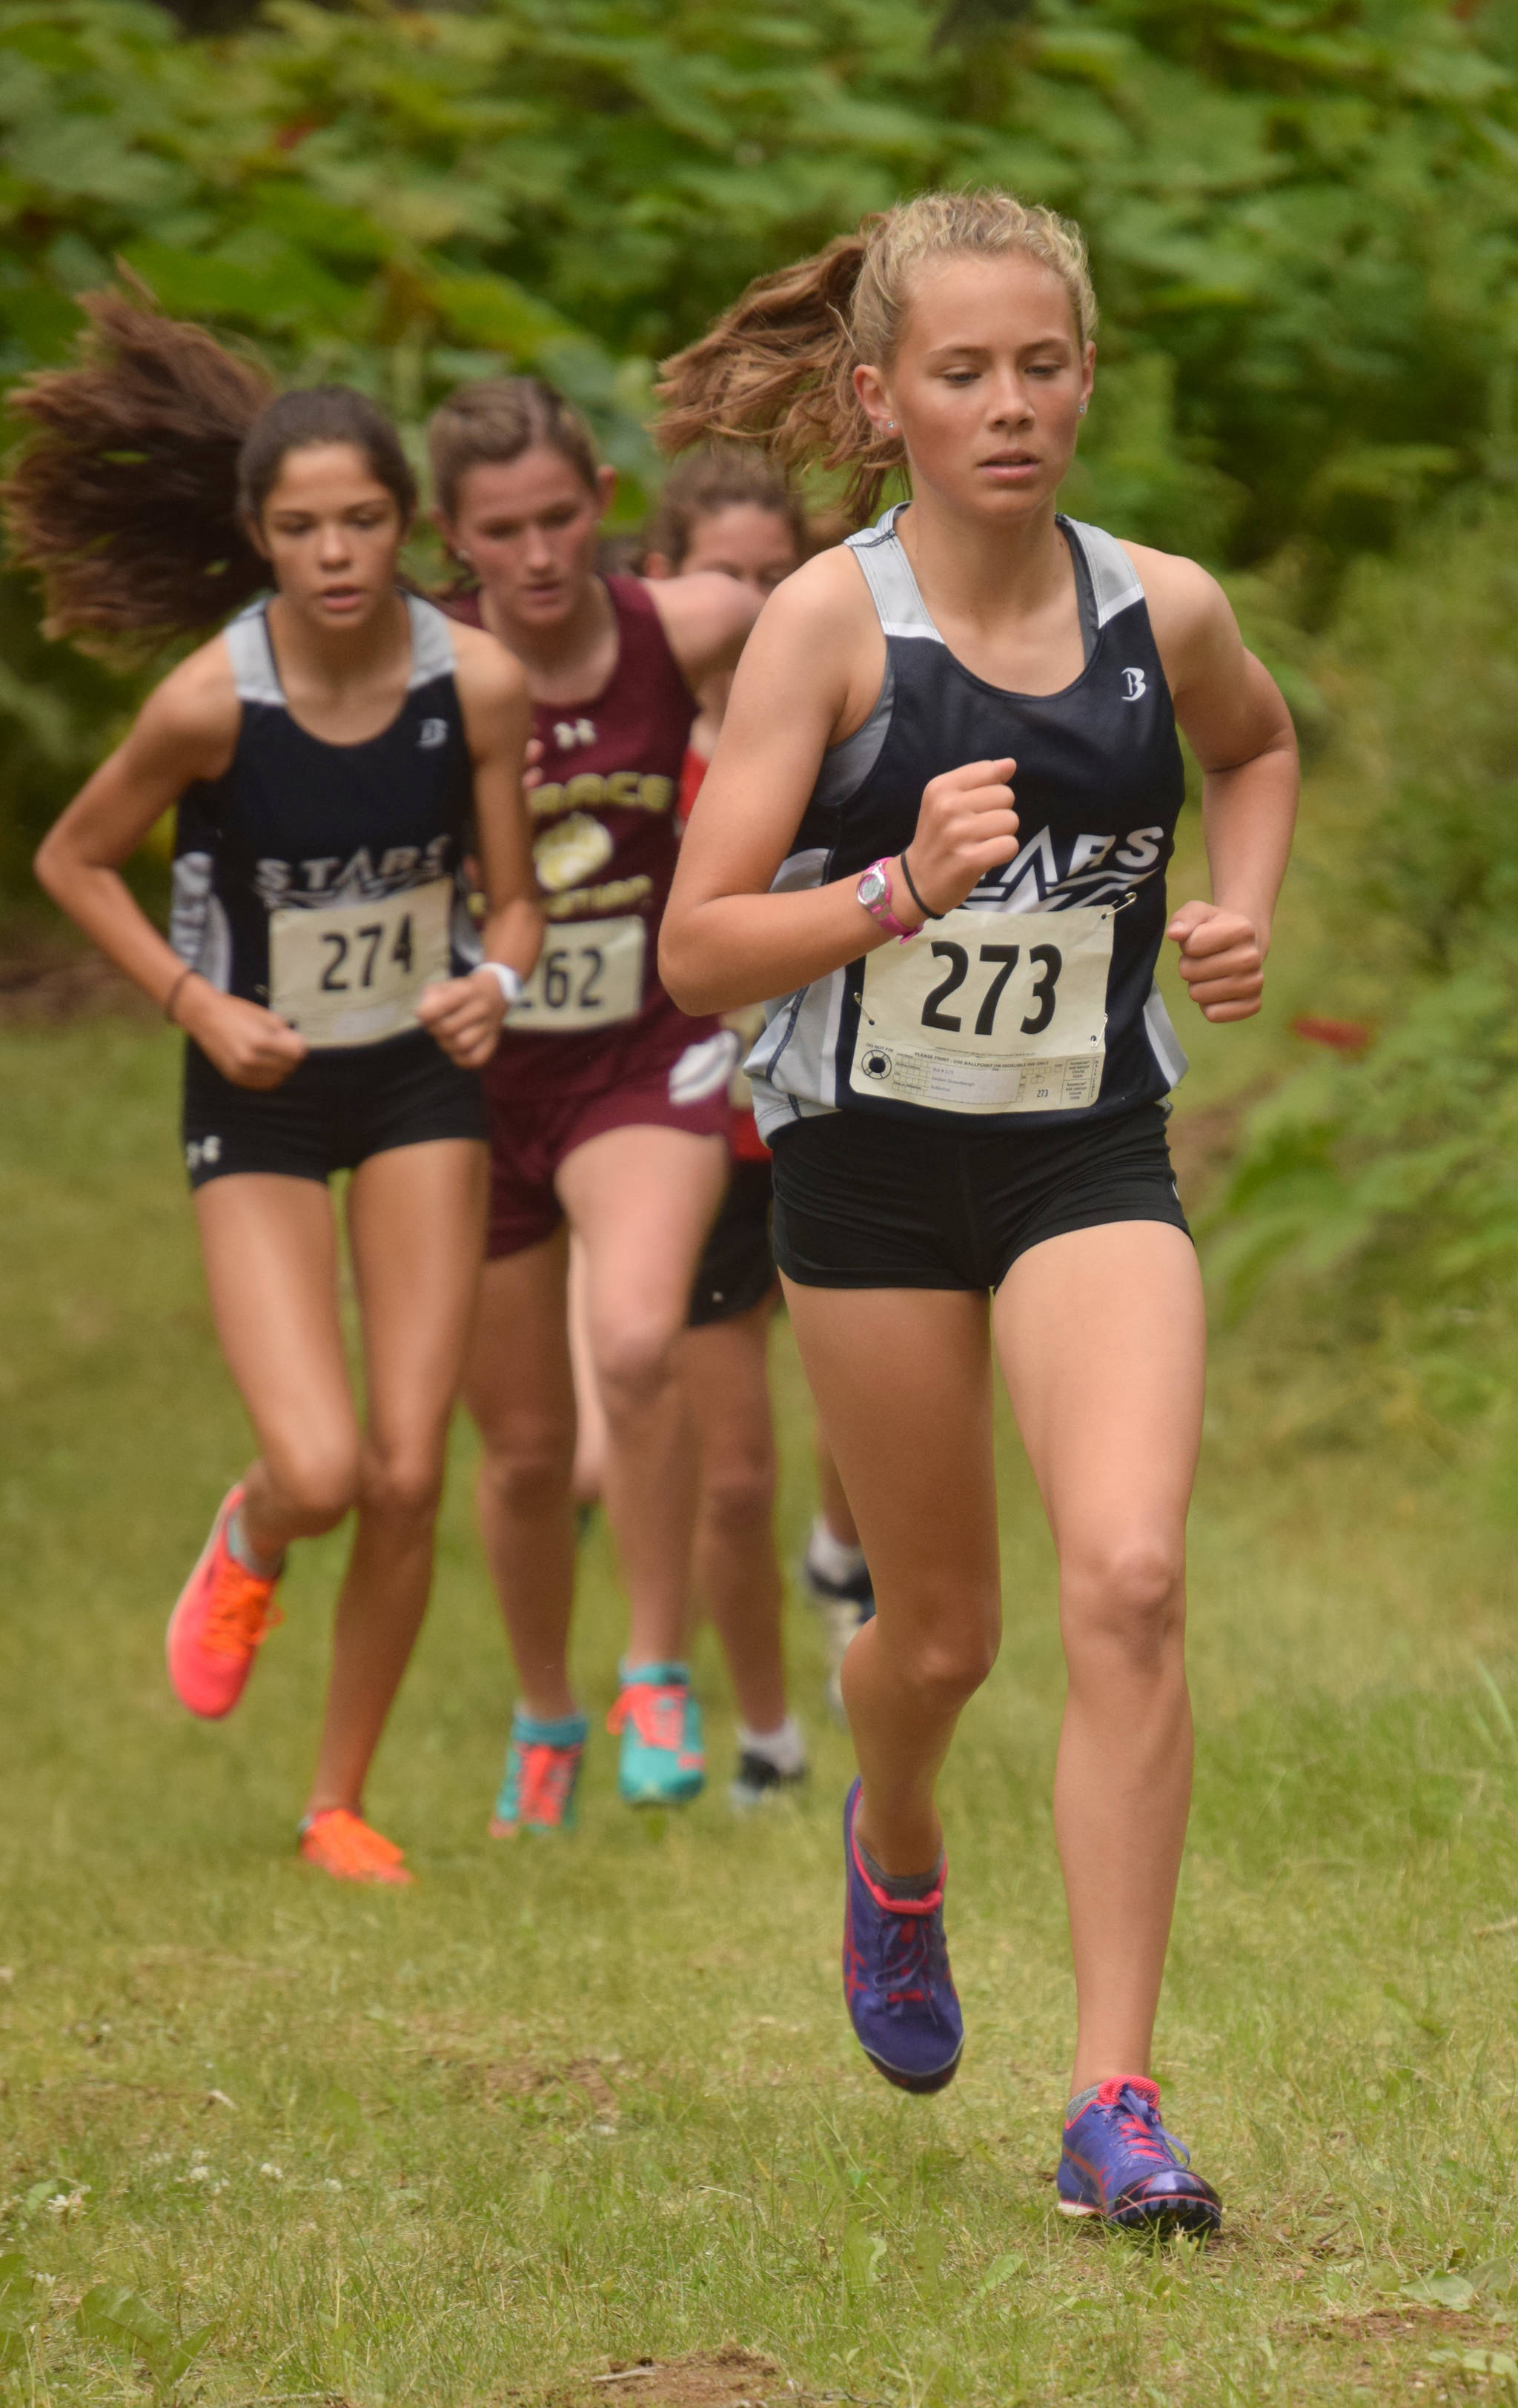 Soldotna freshman Jordan Strausbaugh leads a pack up a hill early in the freshman/sophomore girls race Monday, Aug. 13, 2018, at the Nikiski Class Races at Nikiski High School. Strausbaugh would go on to win the race. (Photo by Jeff Helminiak/Peninsula Clarion)